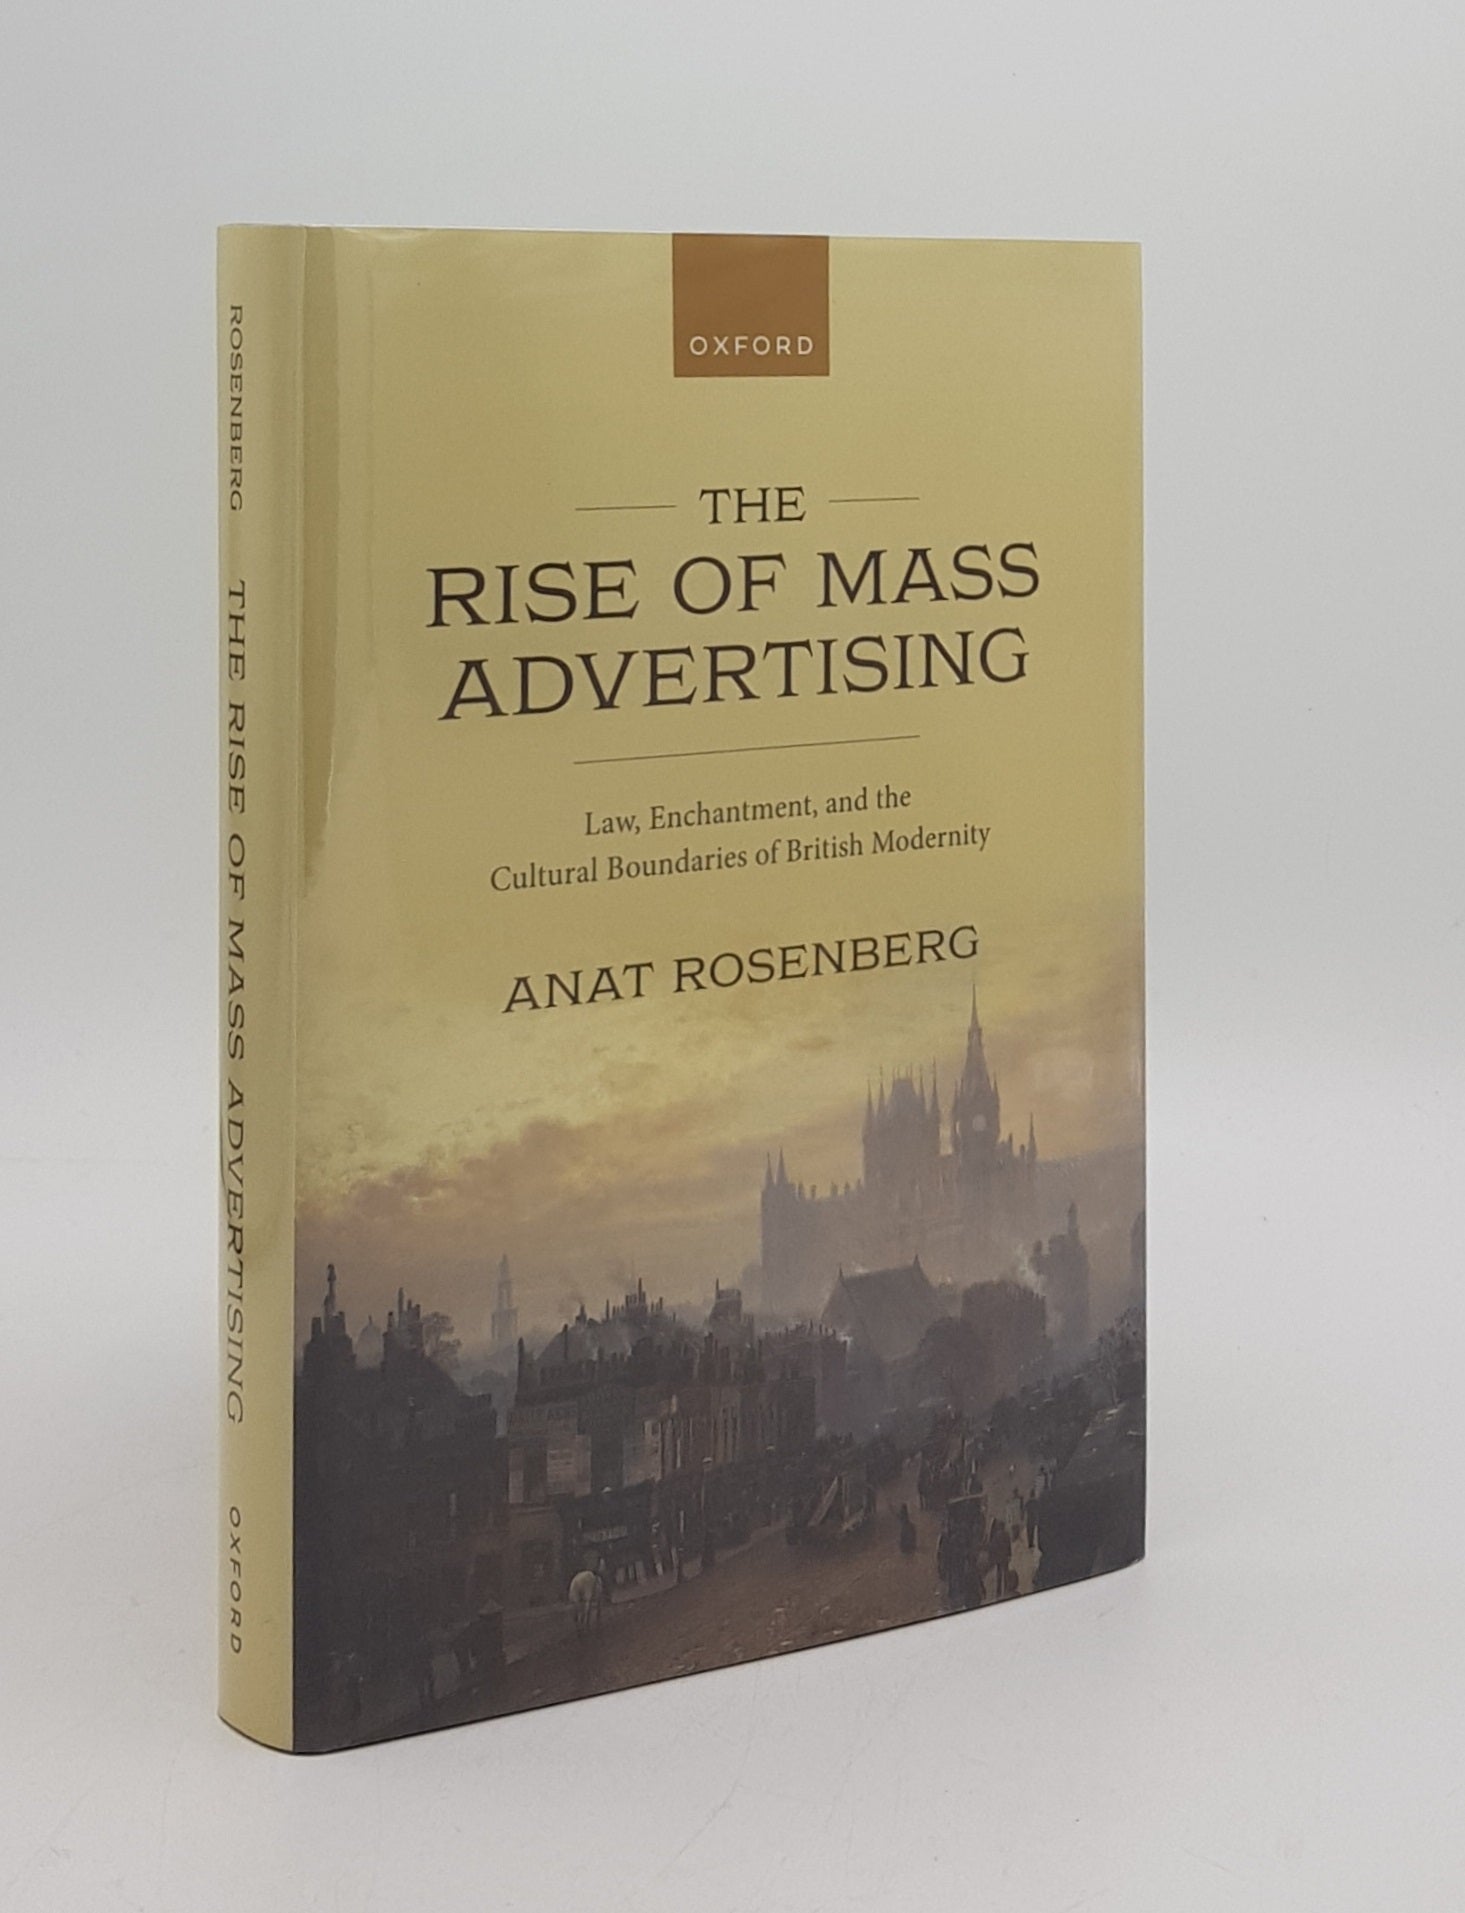 ROSENBERG Anat - The Rise of Mass Advertising Law, Enchantment and the Cultural Boundaries of British Modernity